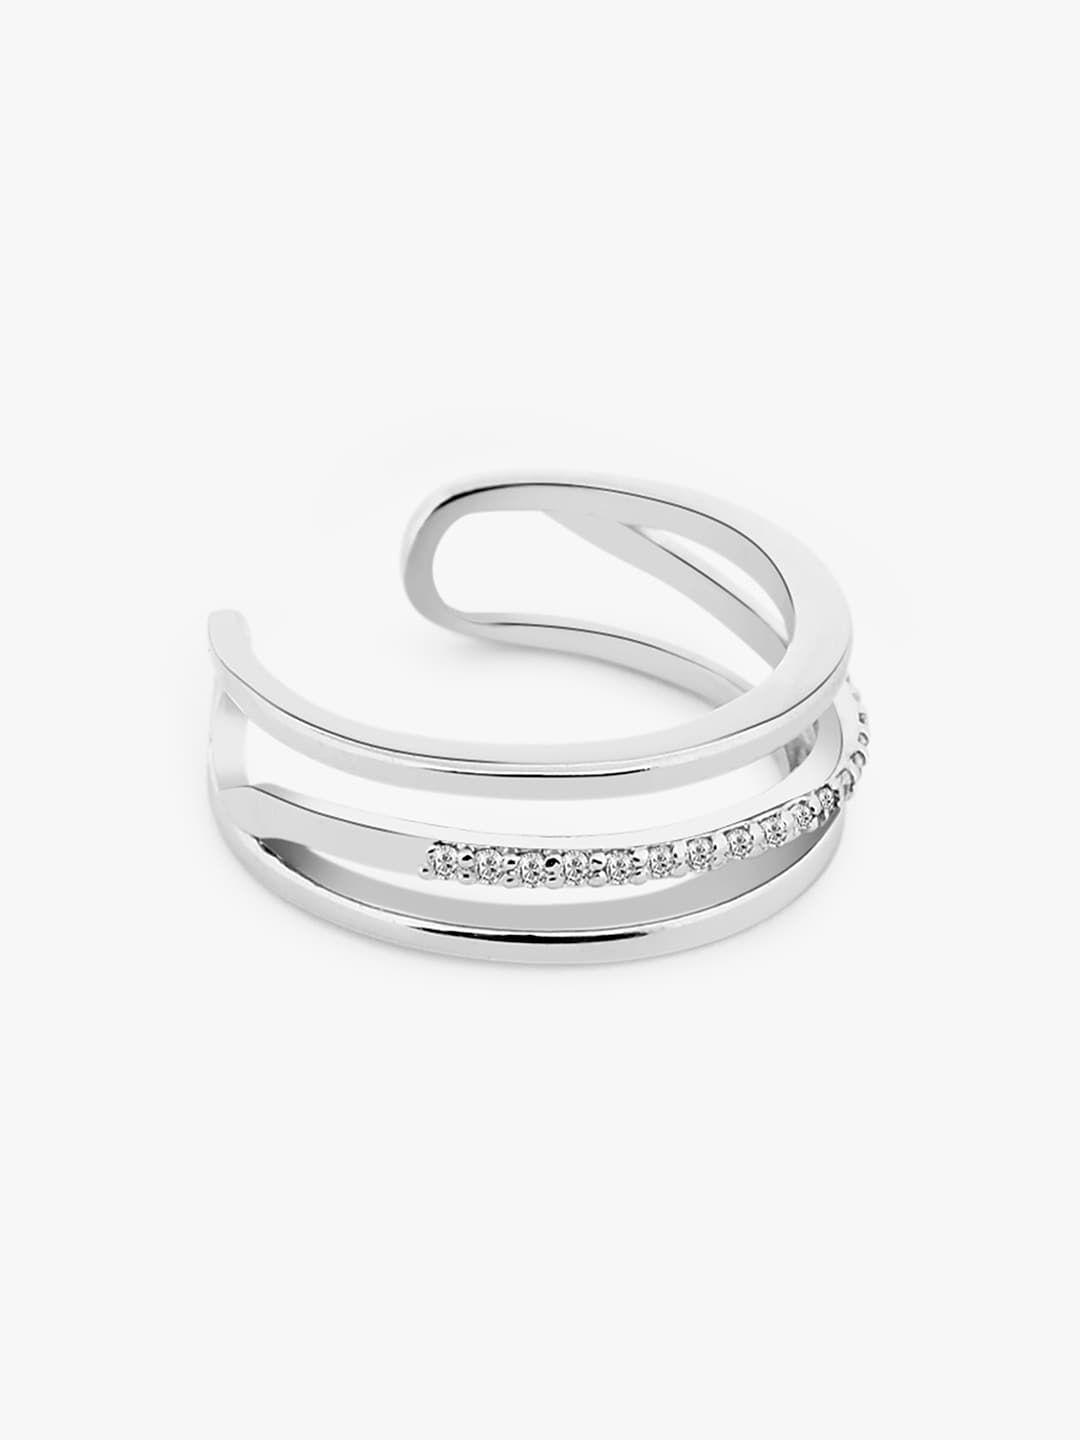 mikoto by fablestreet 925 sterling silver rhodium-plated zircon open band adjustable ring